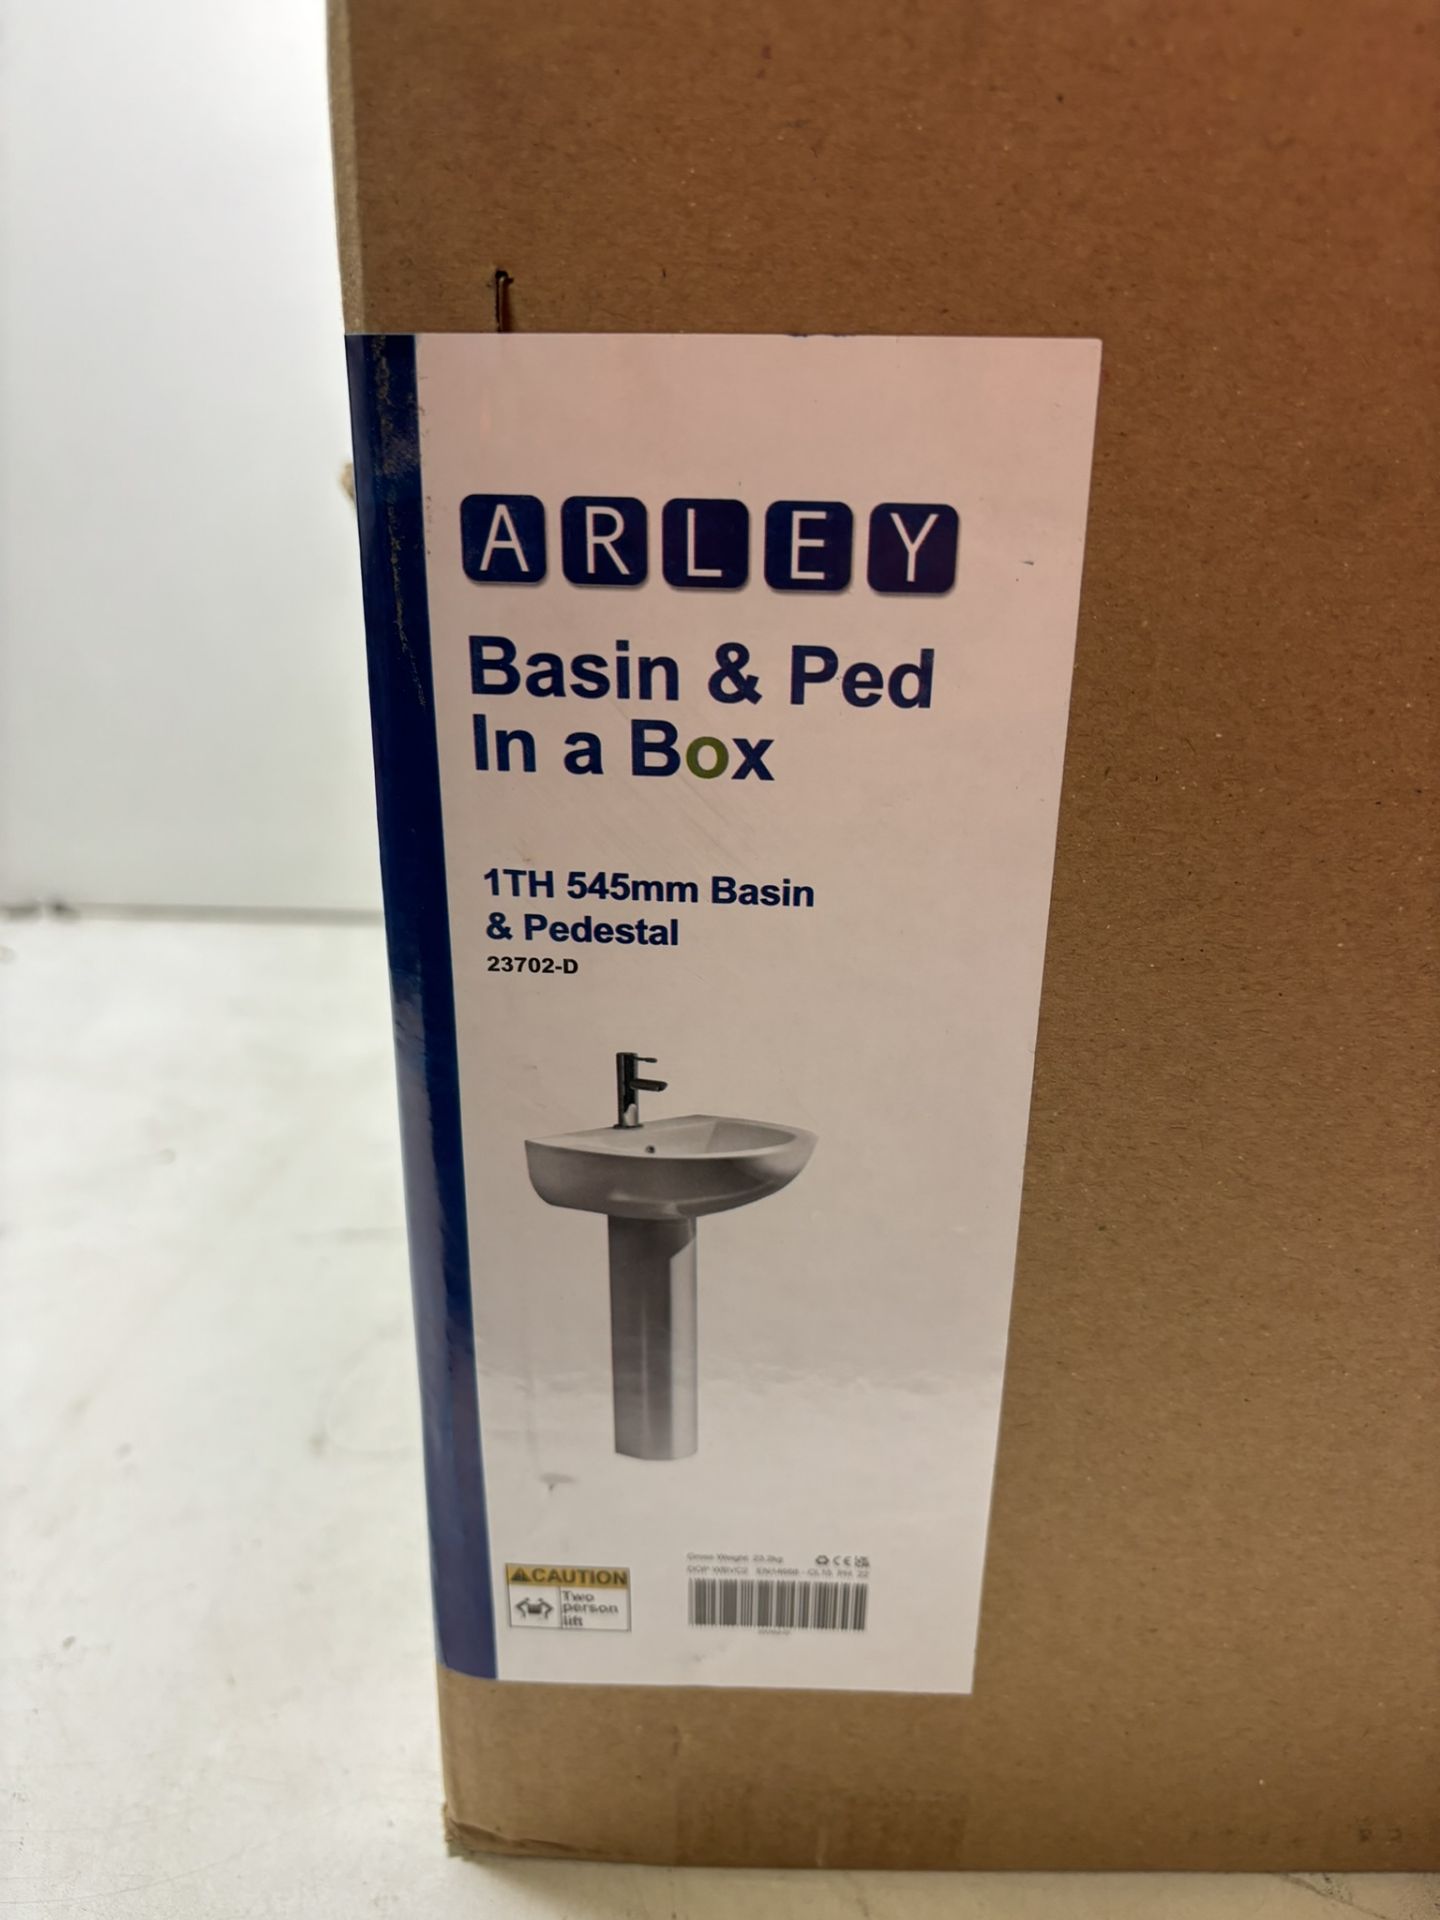 Arley 23702-D 1 Tap Hole 545mm Basin & Pedestal In A Box - Image 9 of 9